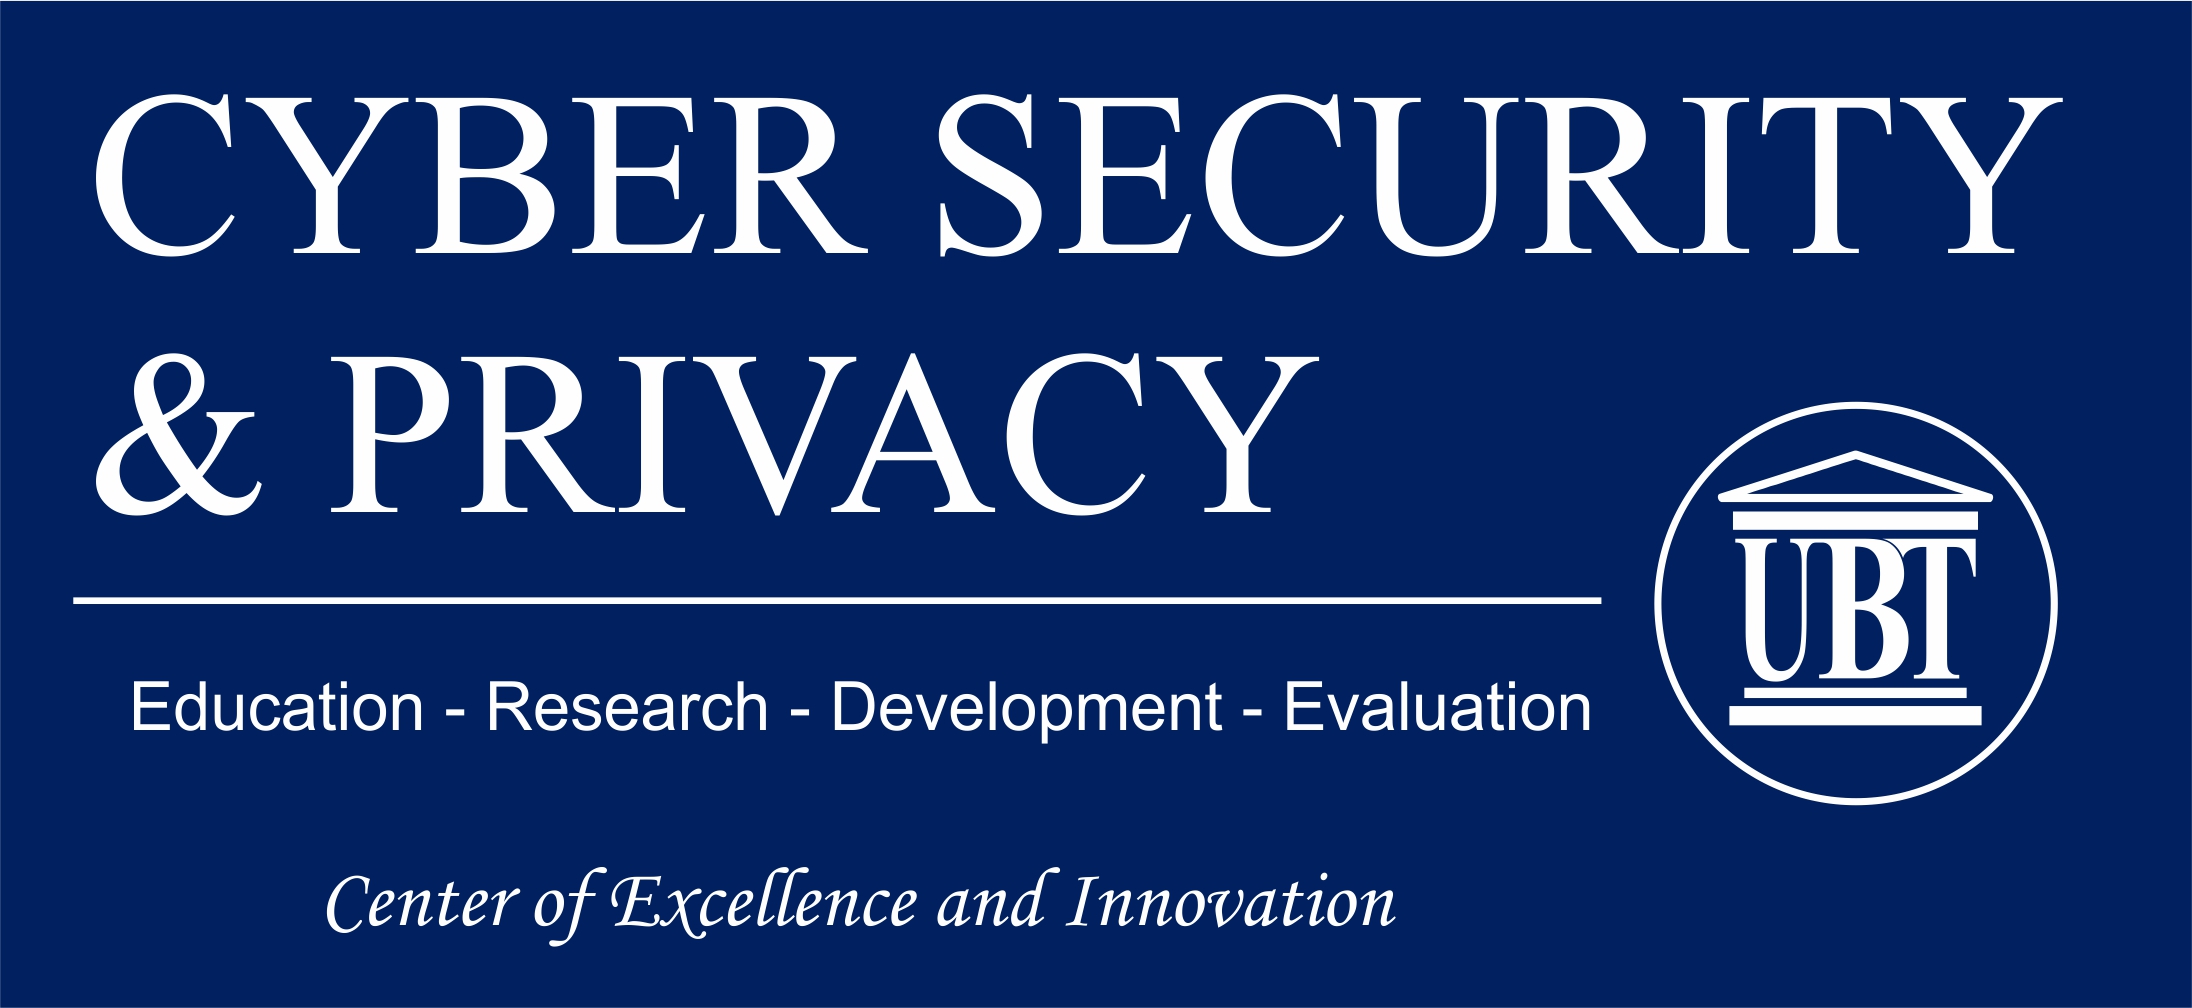 LOGO - Cyber Security and Privacy